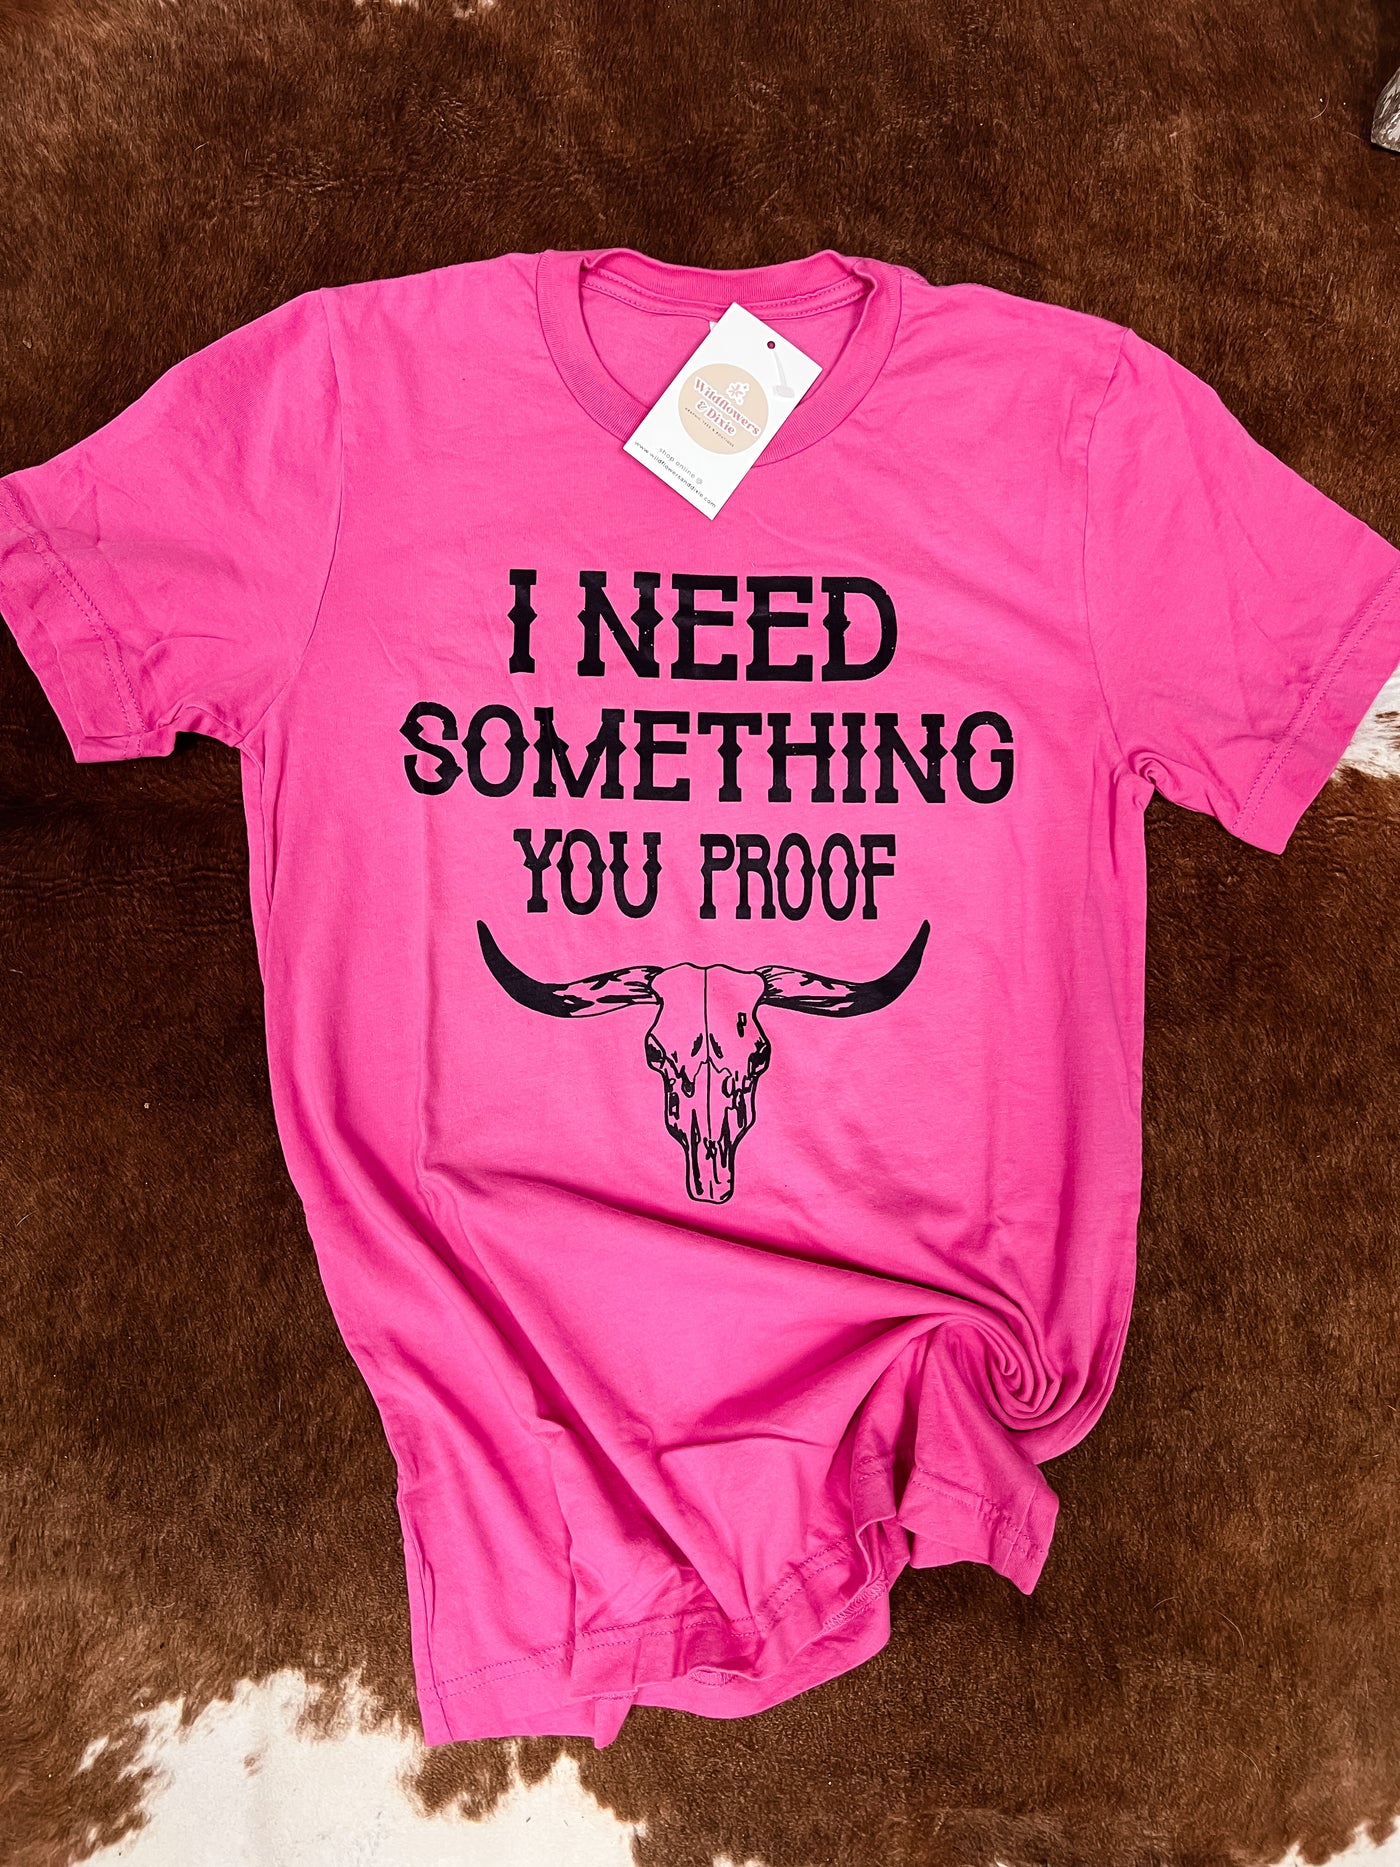 CLEARANCE "I Need Something You Proof" T-shirt